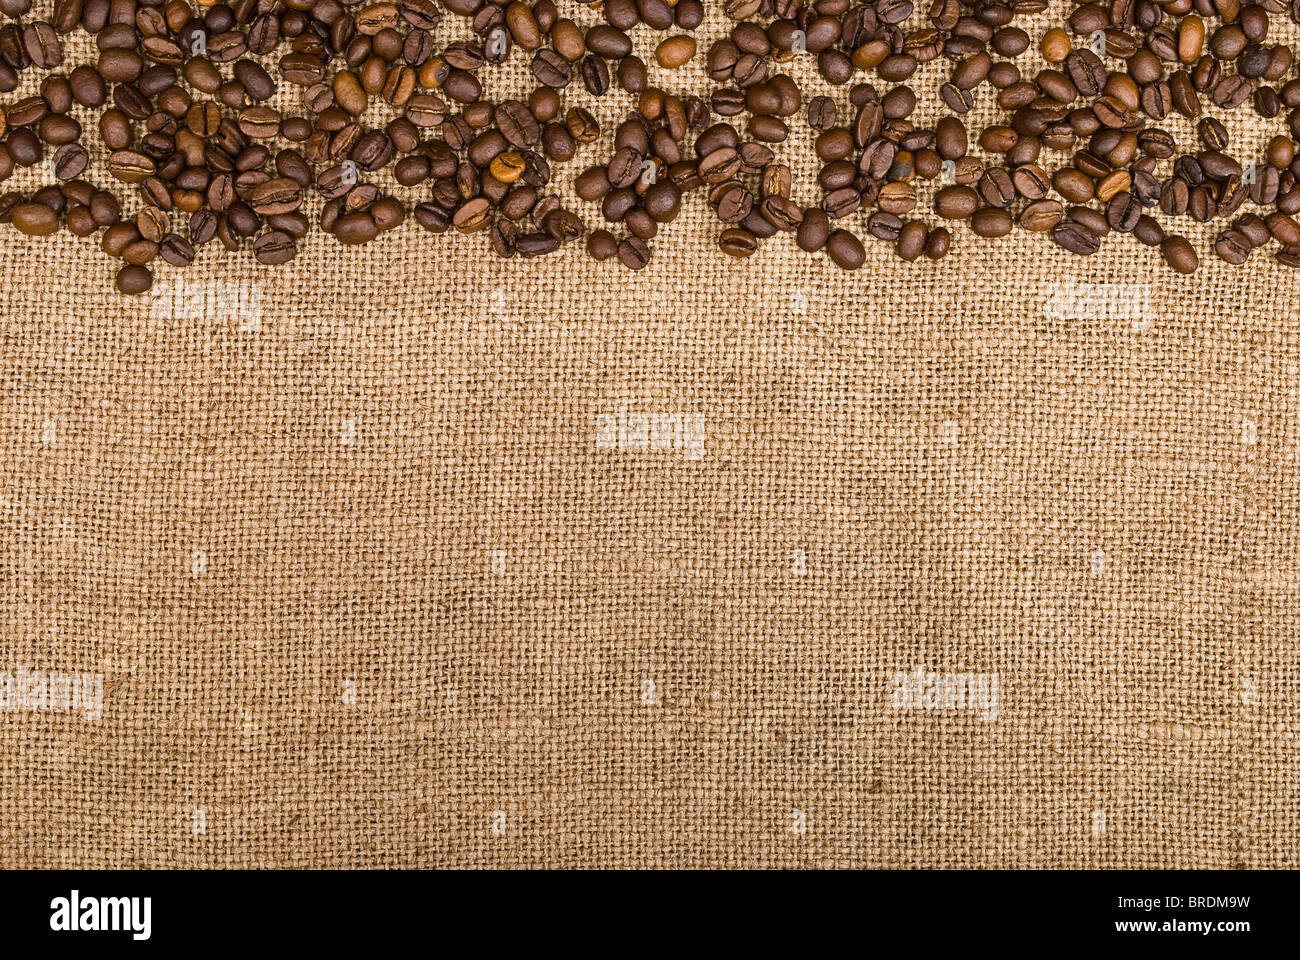 Coffee beans and sackcloth background Stock Photo